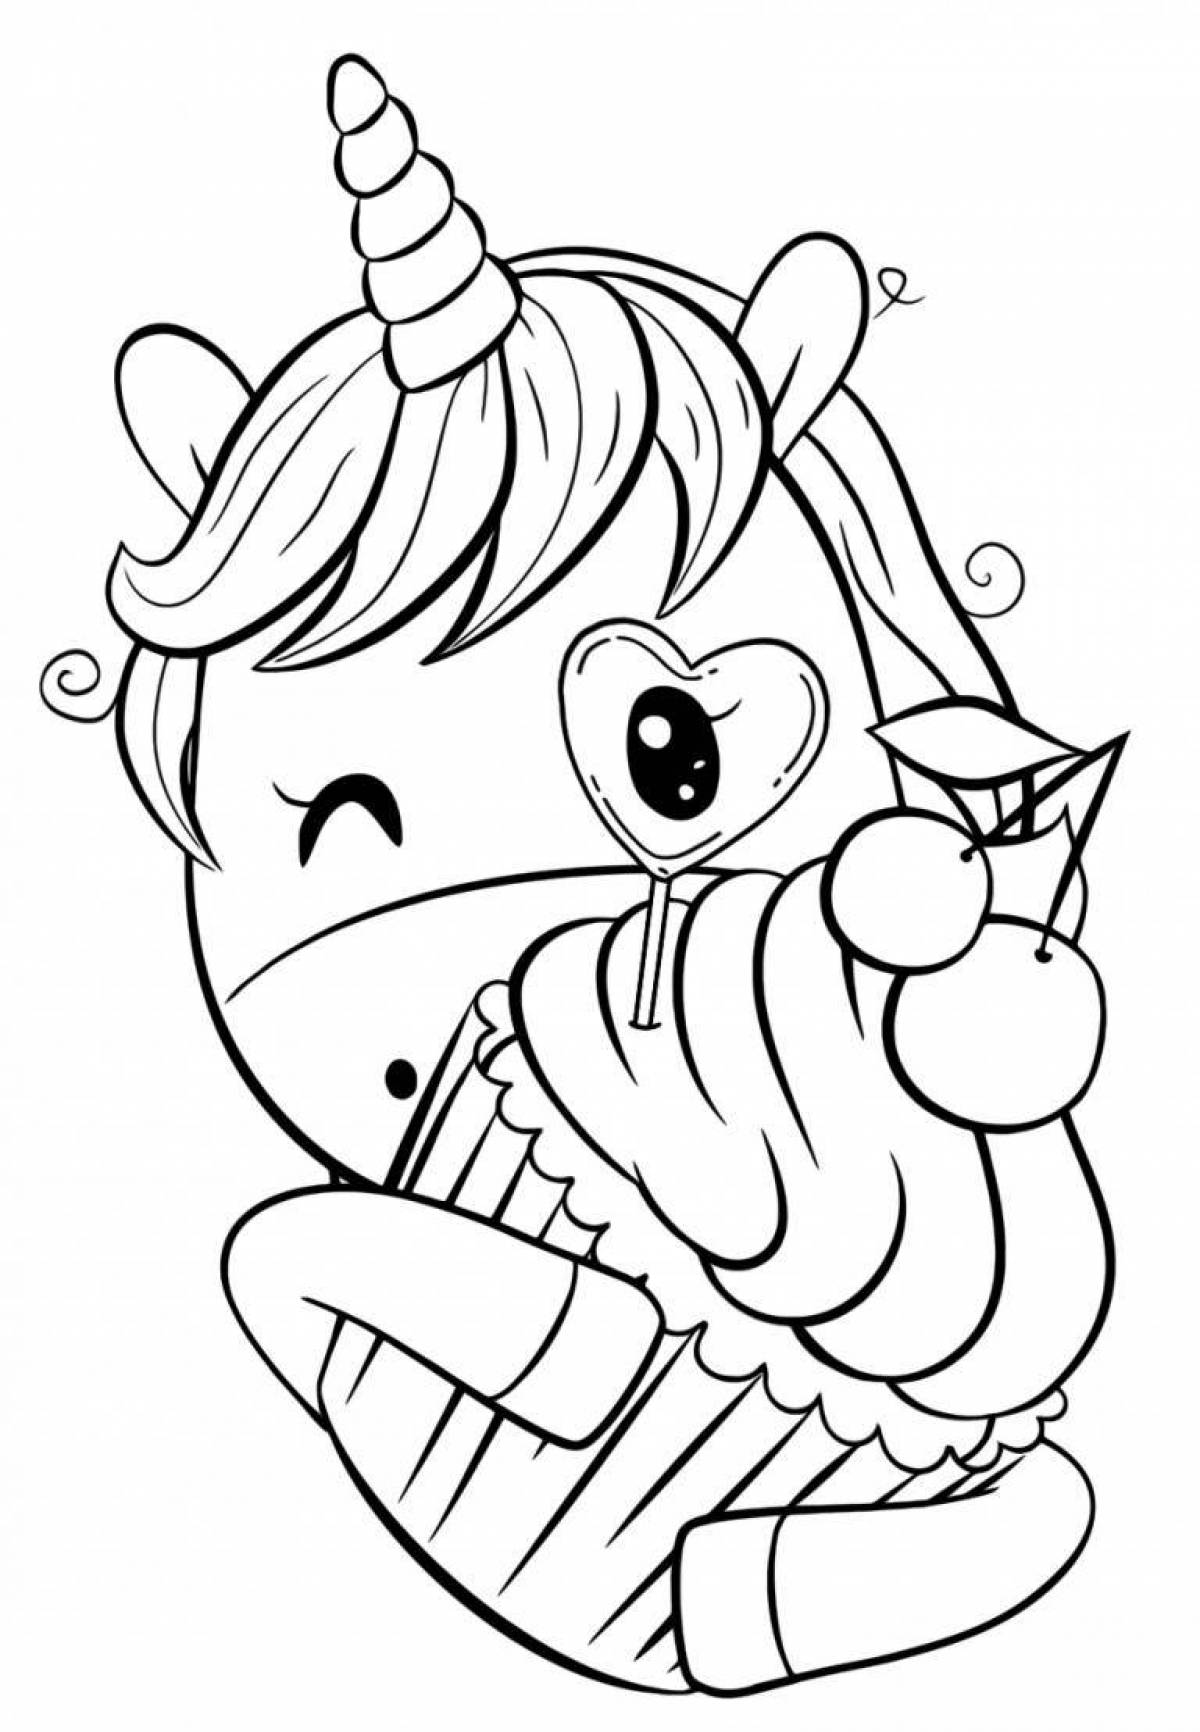 Colourful coloring for girls cute unicorns